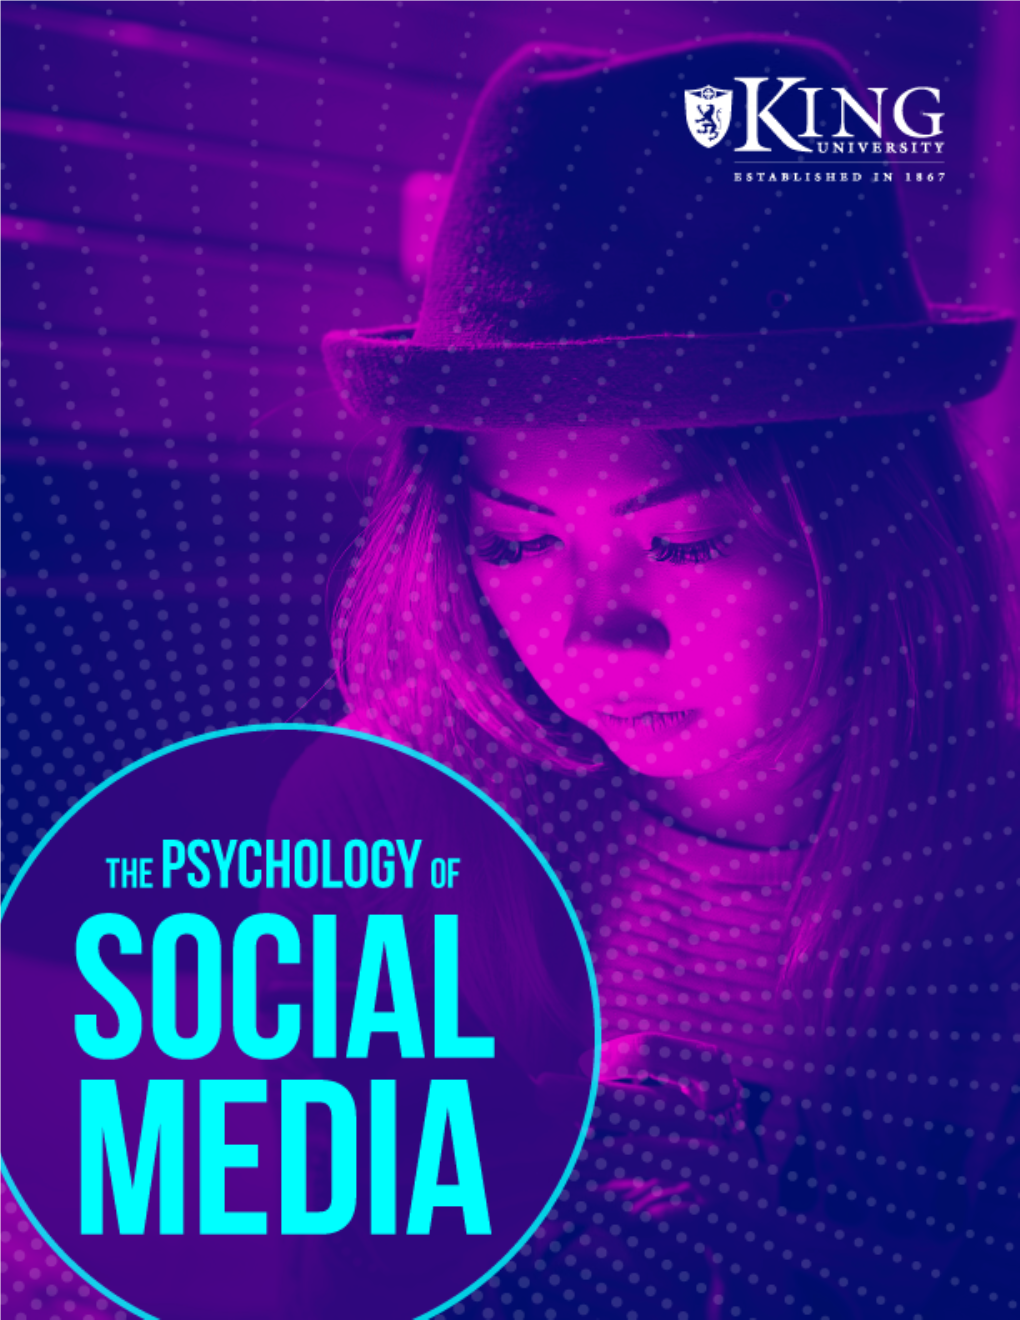 The Psychology of Social Media 1 Contents